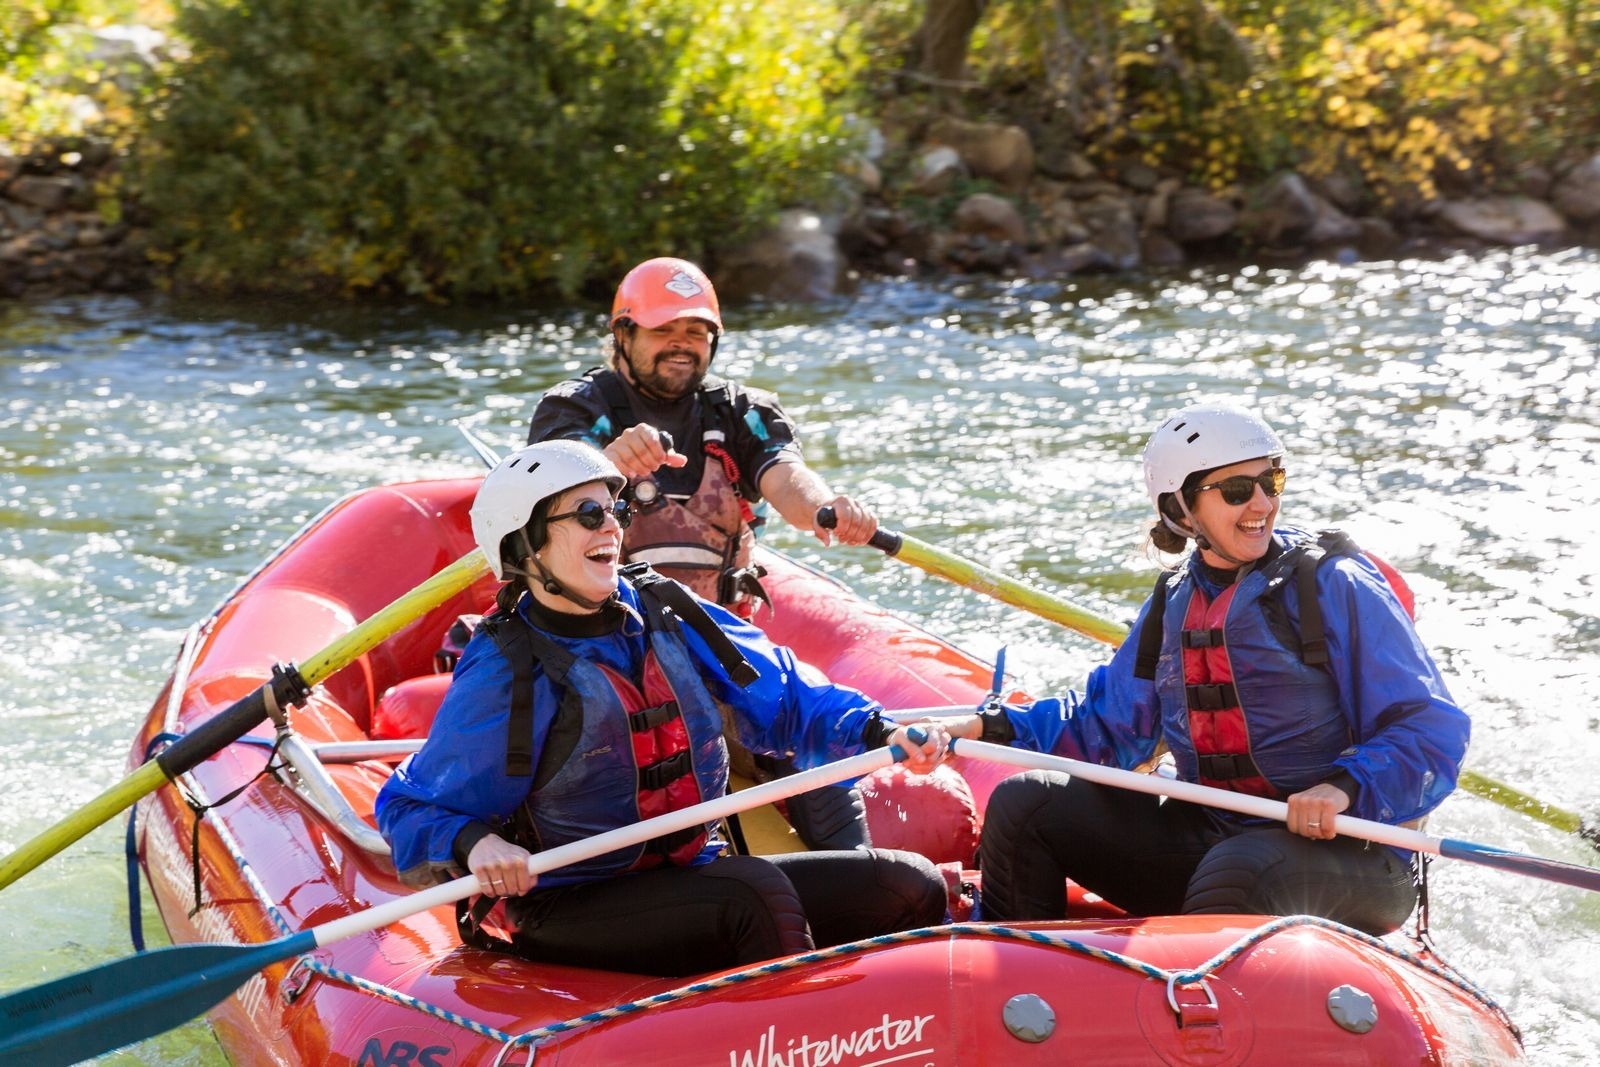 Whitewater rafting in Coloma, California